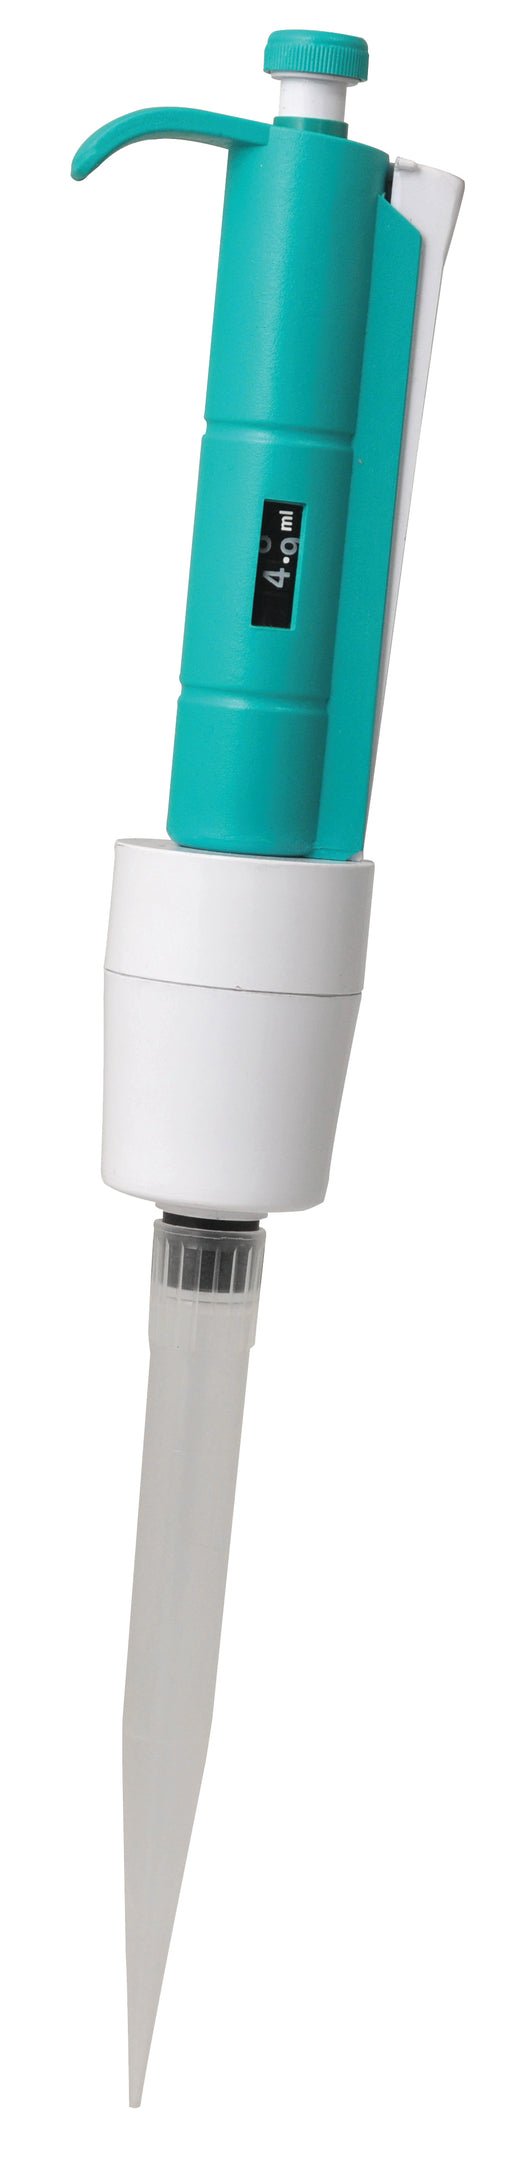 High Volume Pipette, 1-5 ml (Discontinued)